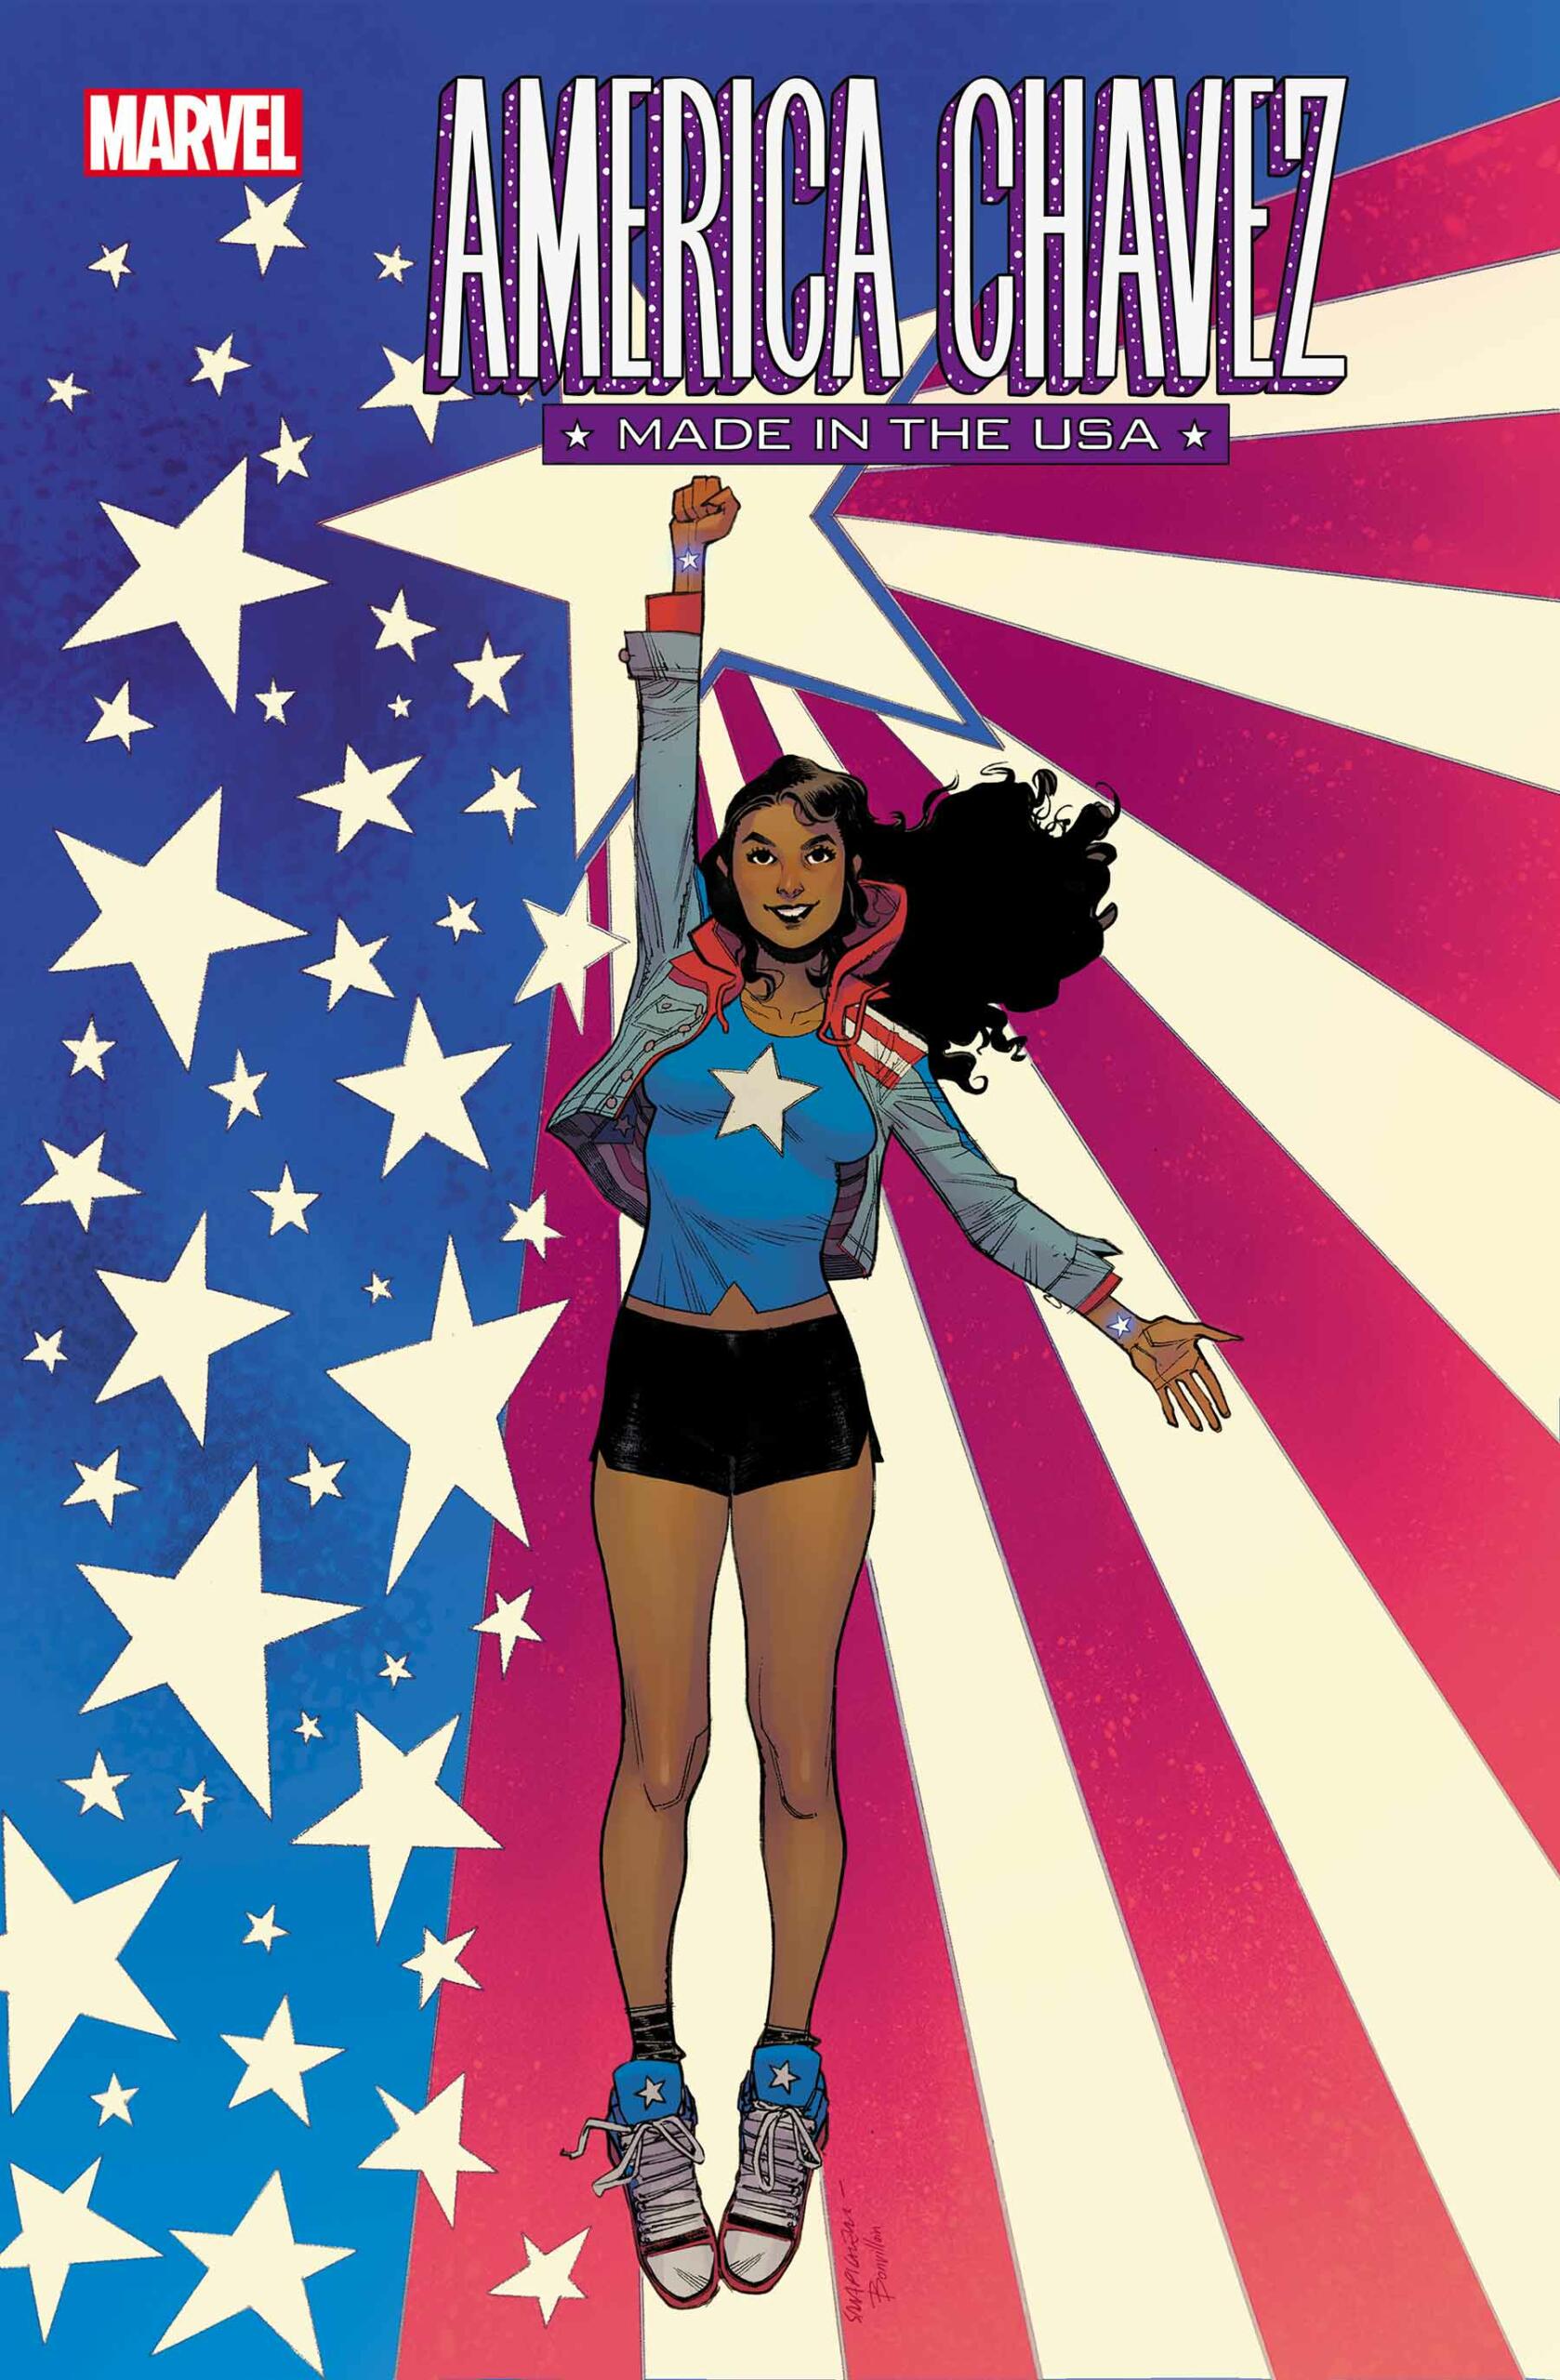 New America Chavez Solo Series Debuts In March Comix Asylum 9945